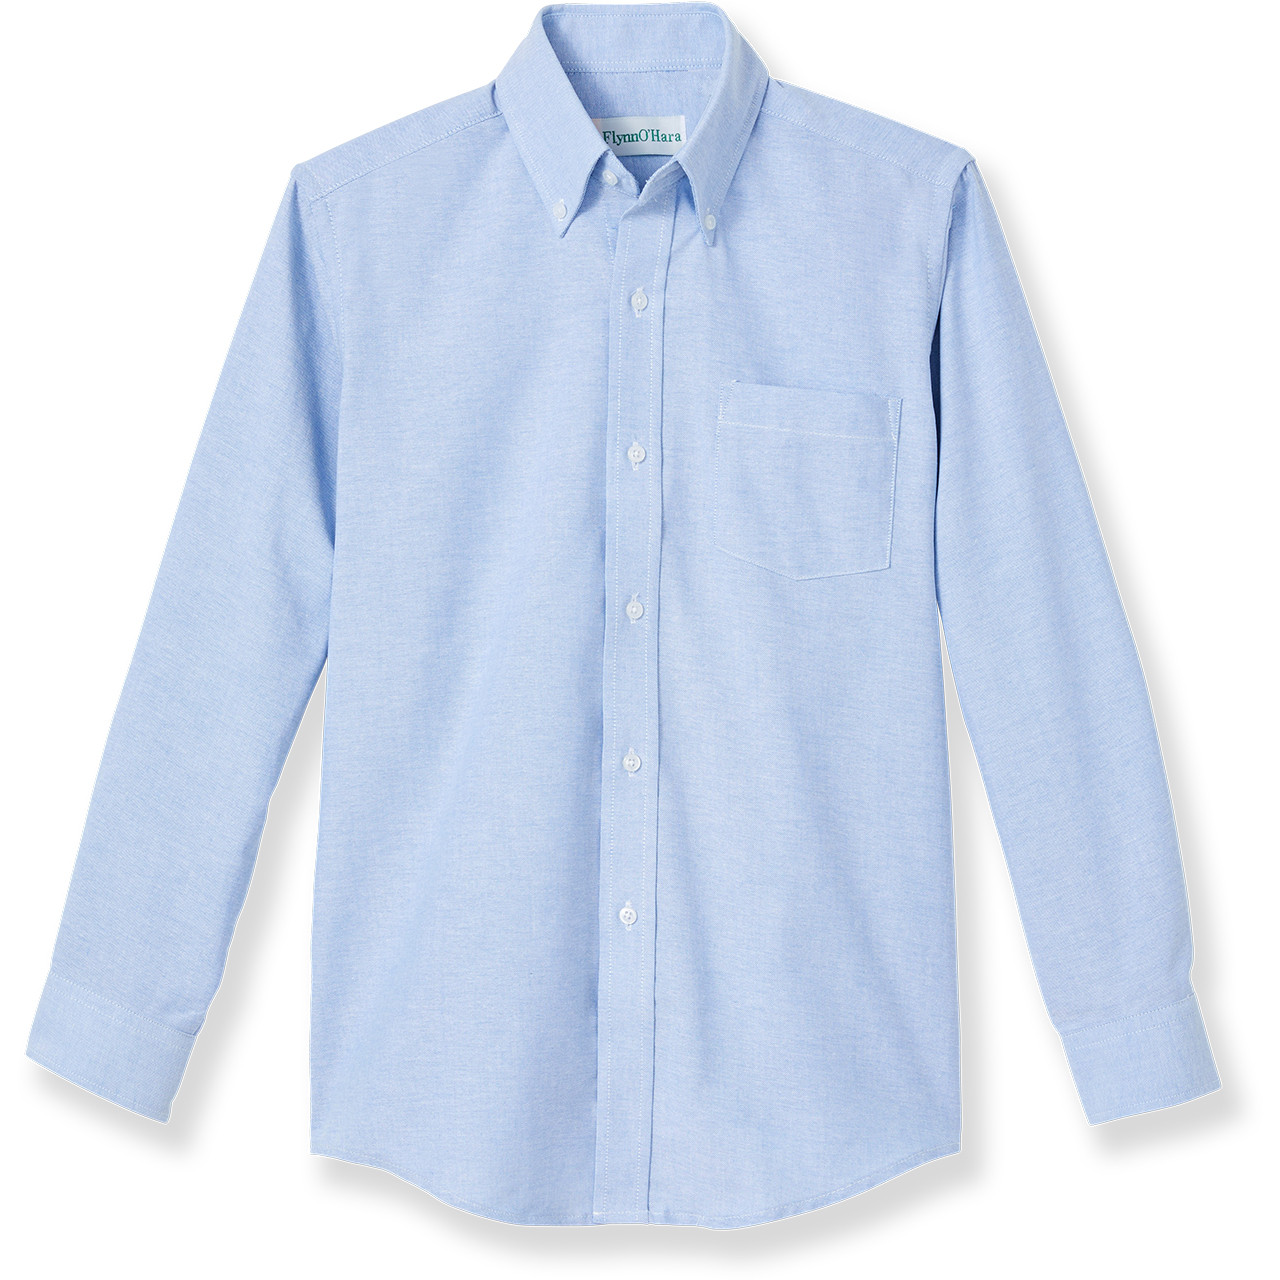 Long Sleeve Oxford Shirt with embroidered logo